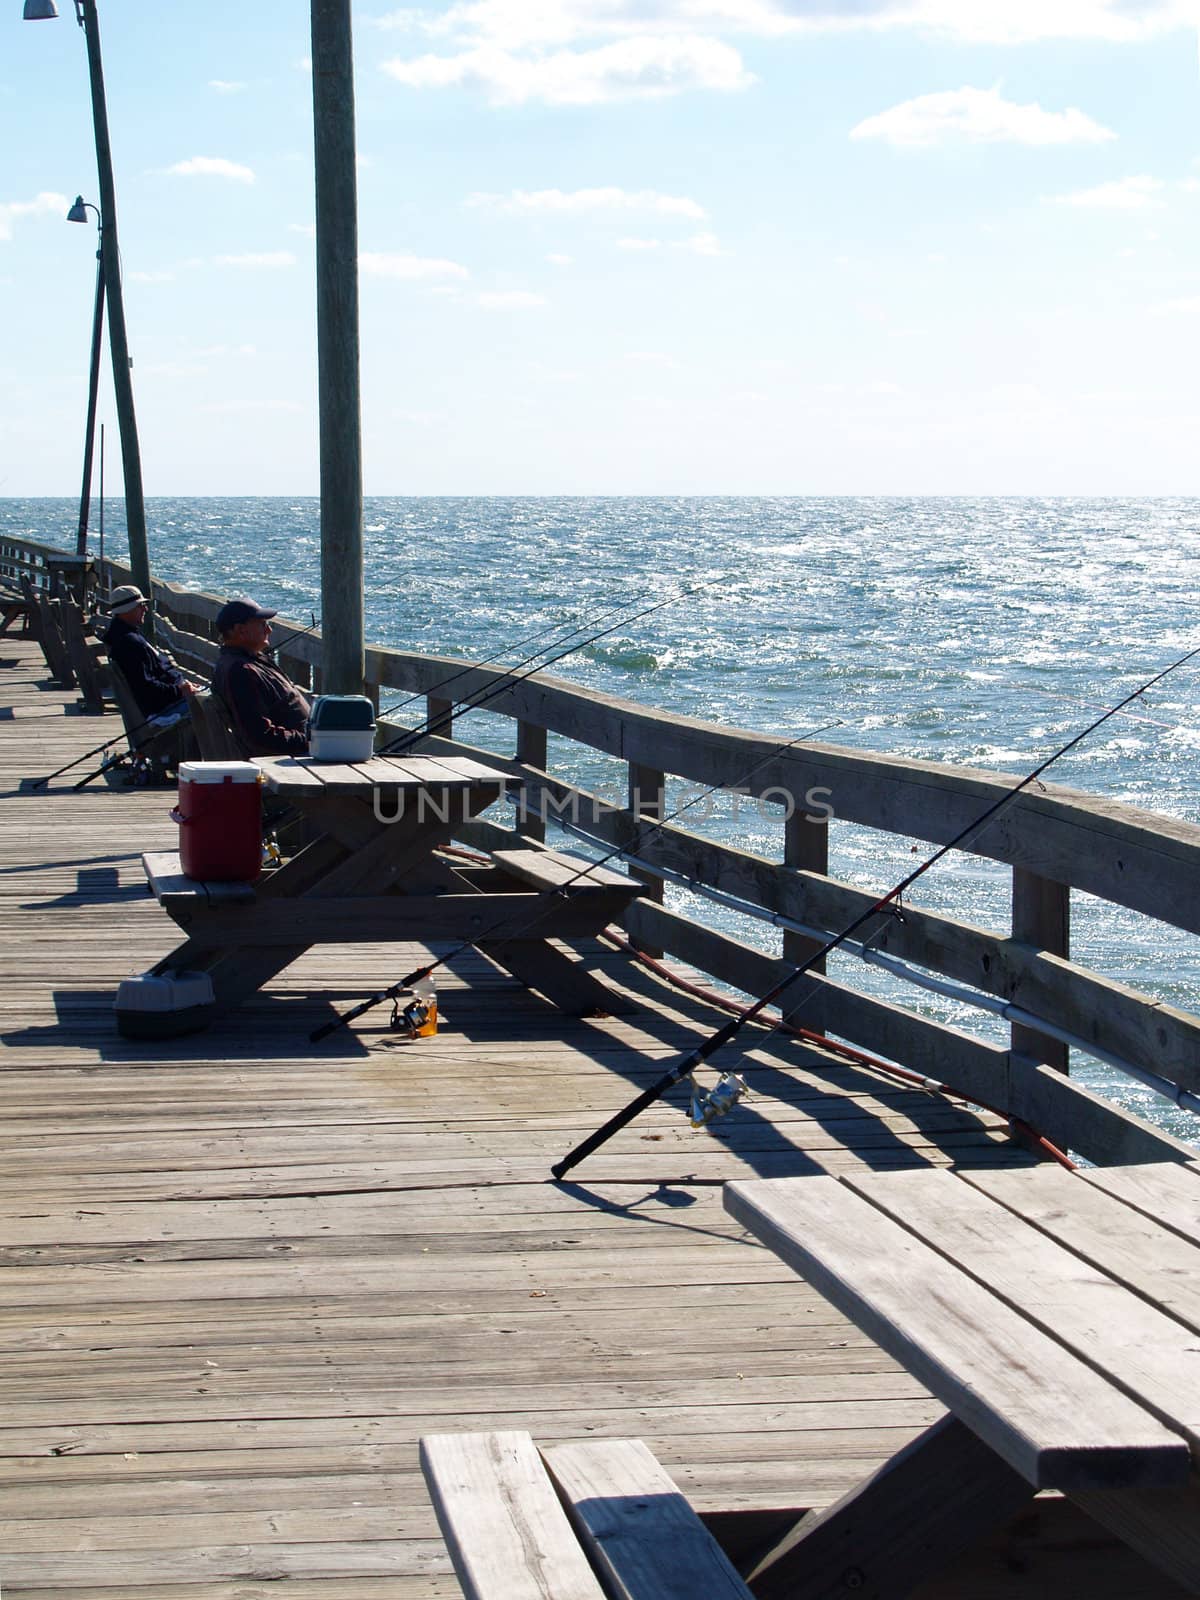 Two men fishing from a pier over the Atlantic Ocean. They have fishing rods, coolers, and other assorted equipment.